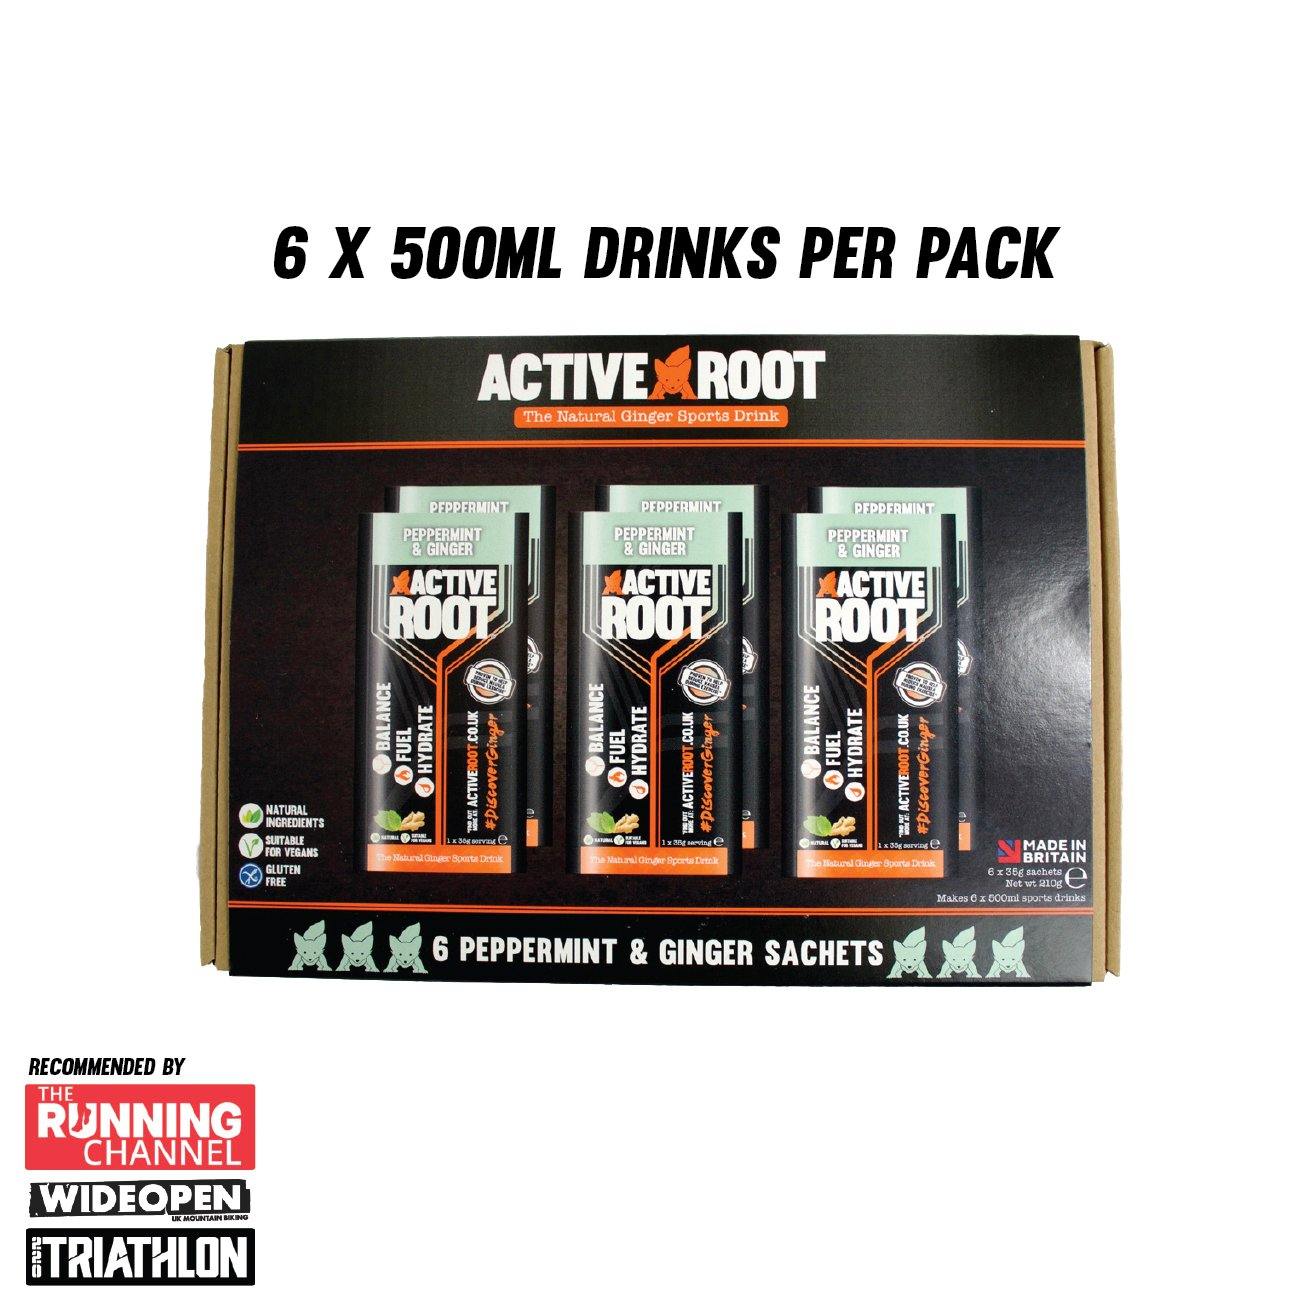 6 Sachet Pack - Peppermint & Ginger Flavour Sports Drink - Active Root